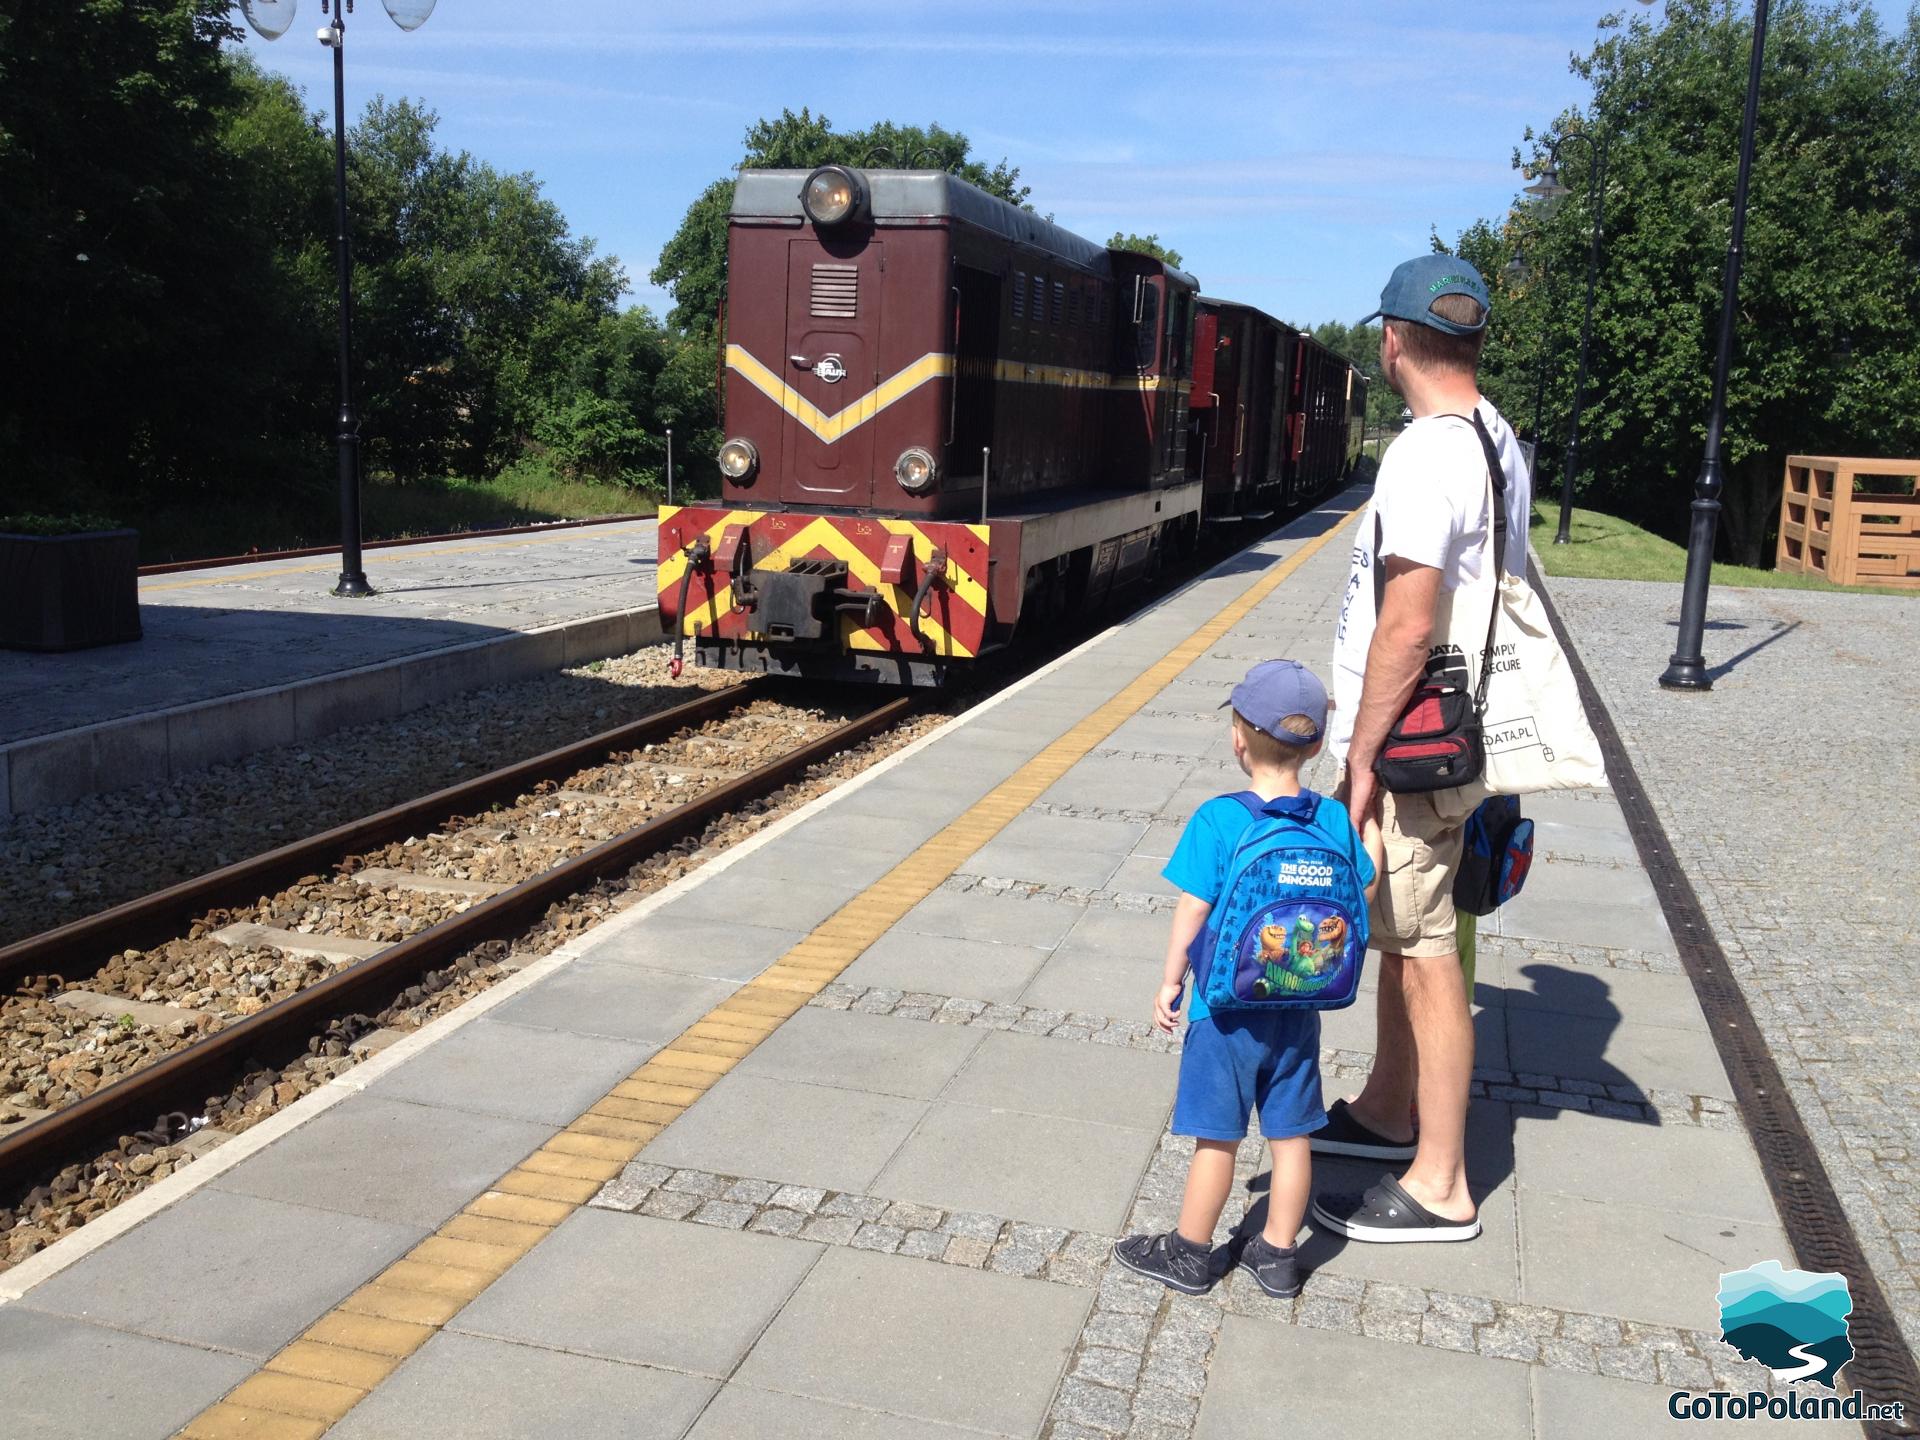 two boys and a man at the train station